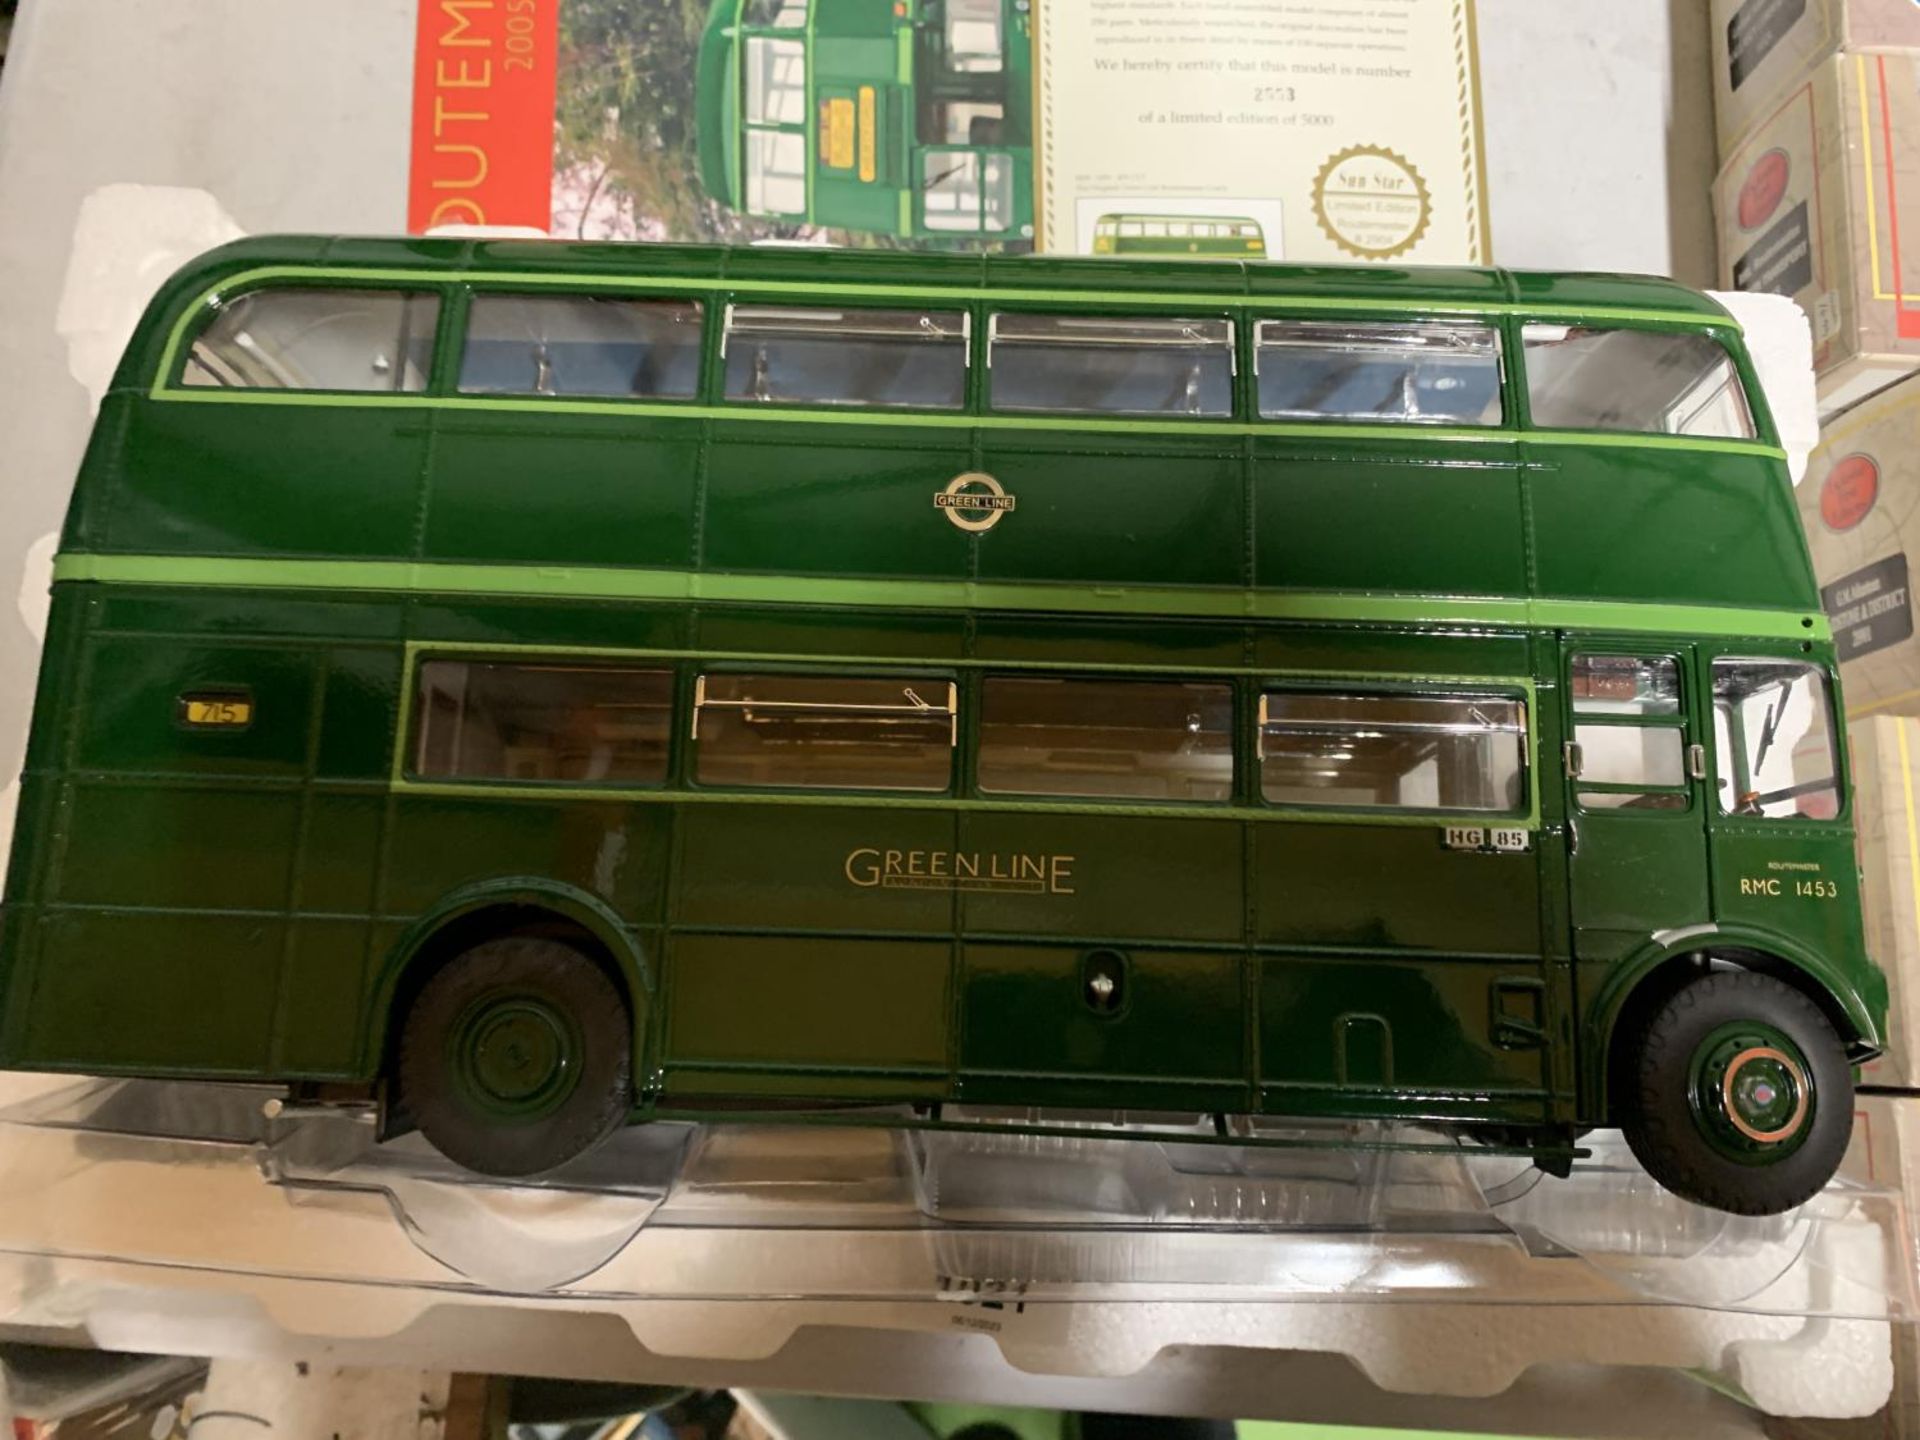 A SUN STAR ROUTEMASTER GREENLINE LIMITED EDITION BUS, 1:24 SCALE - AS NEW IN BOX, WITH NUMBERED - Image 2 of 4